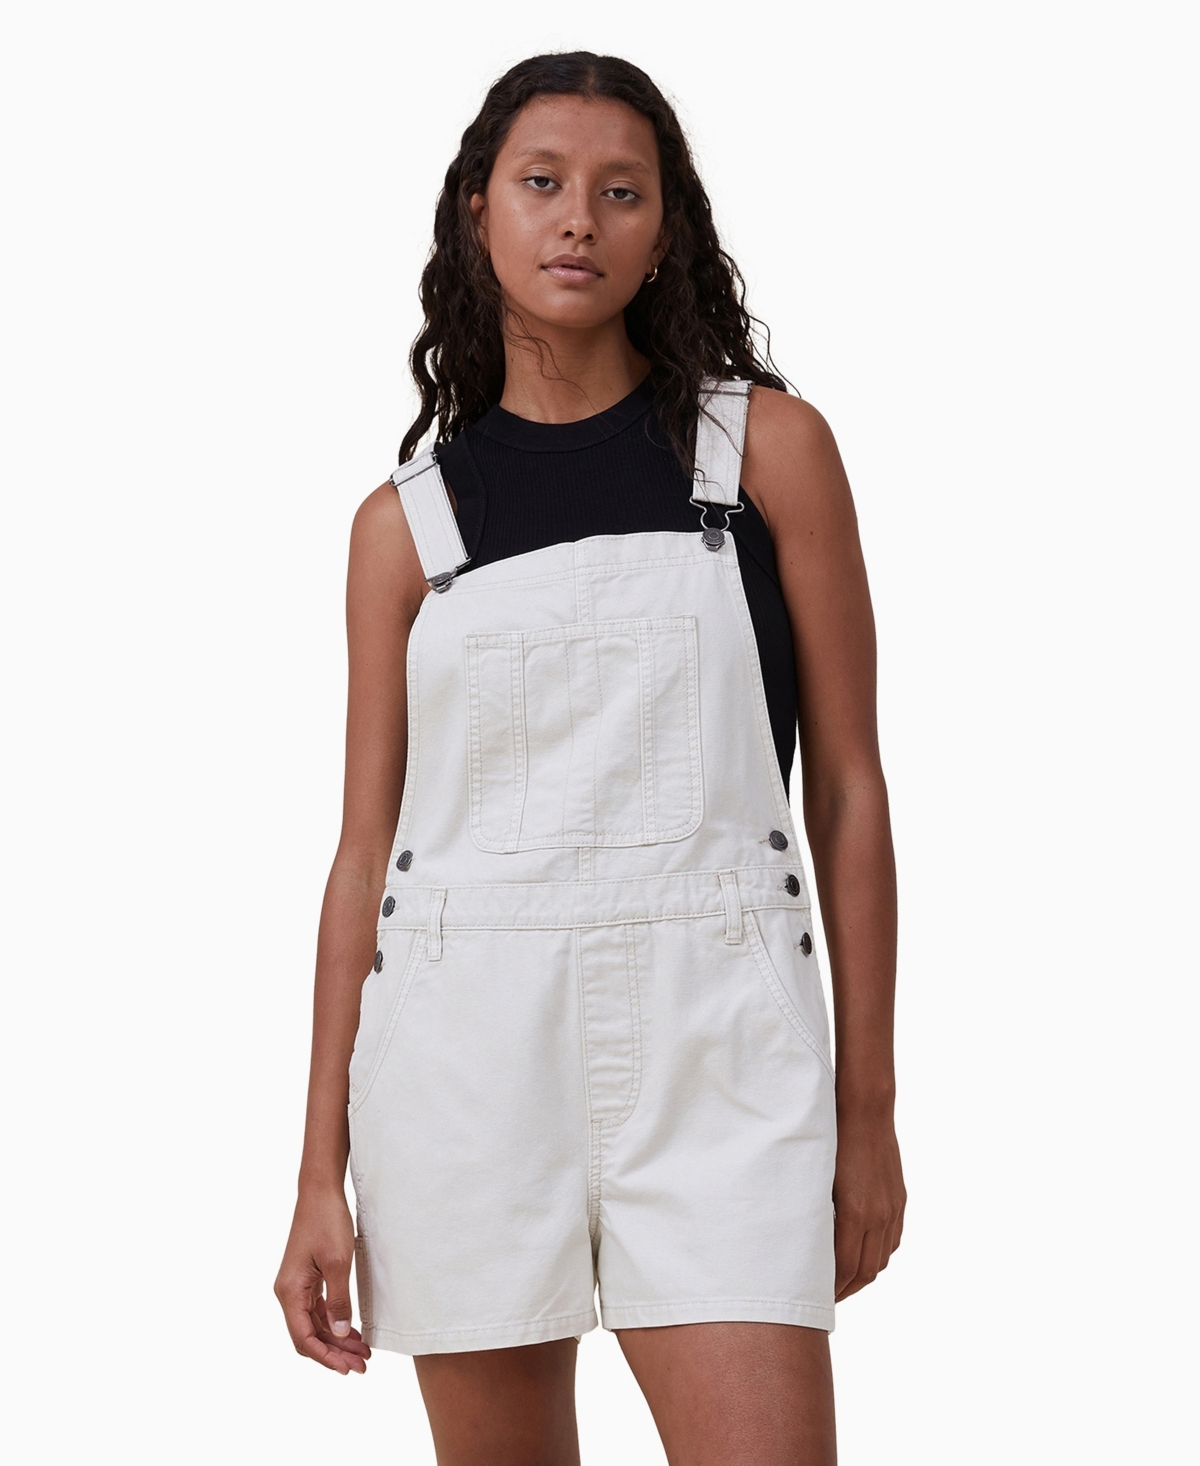 COTTON ON WOMEN'S UTILITY CANVAS OVERALL SHORTS